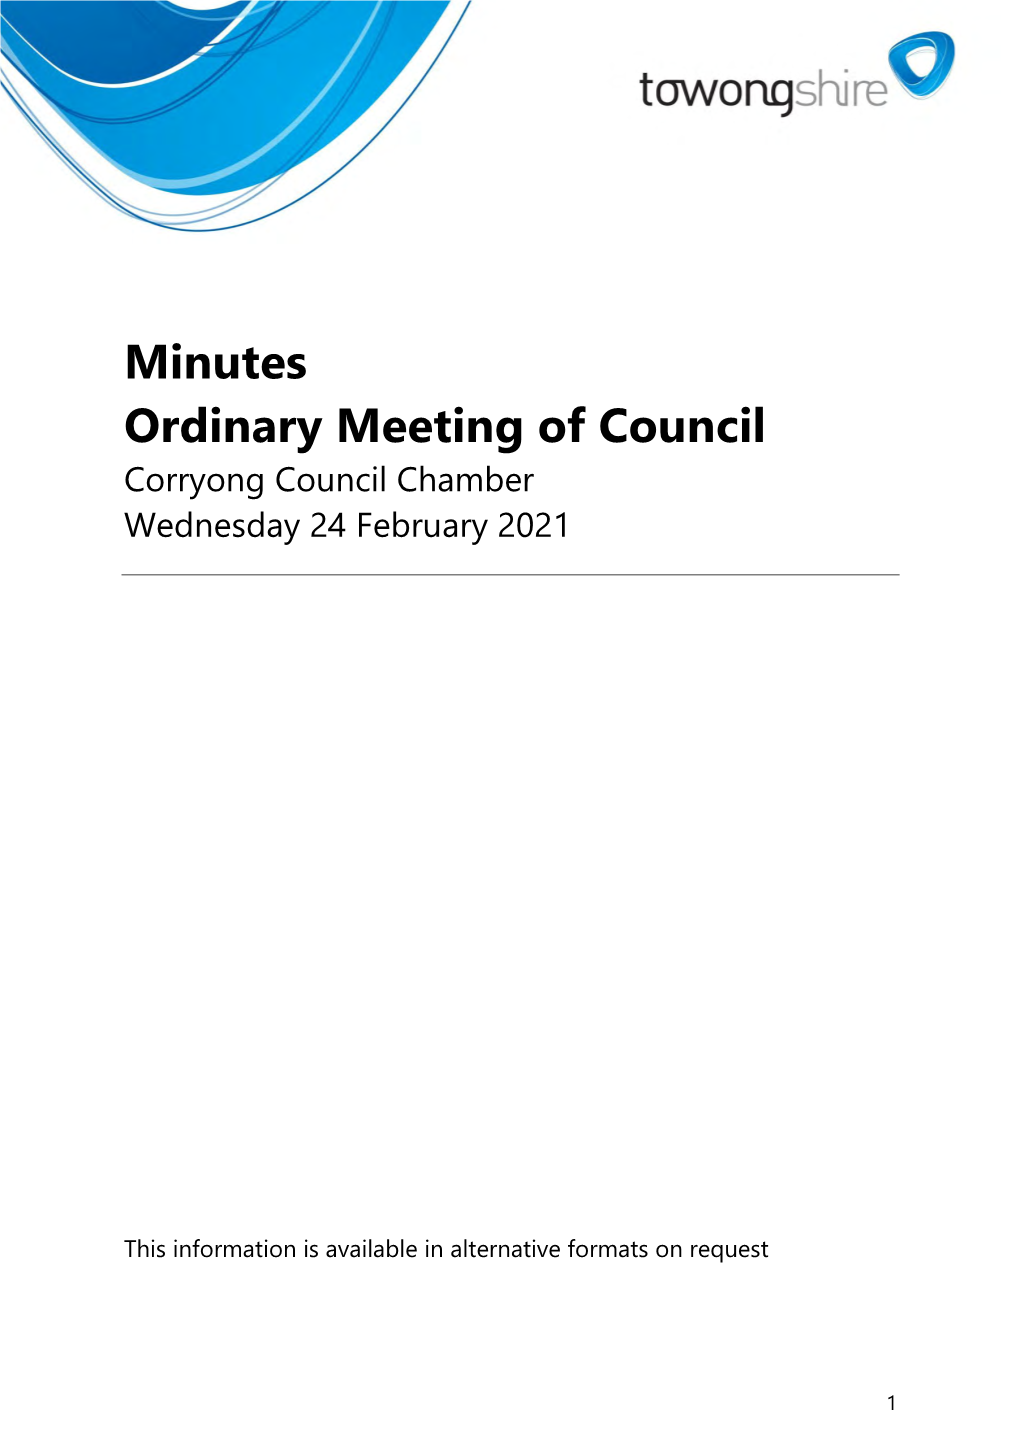 Minutes Ordinary Meeting of Council Corryong Council Chamber Wednesday 24 February 2021